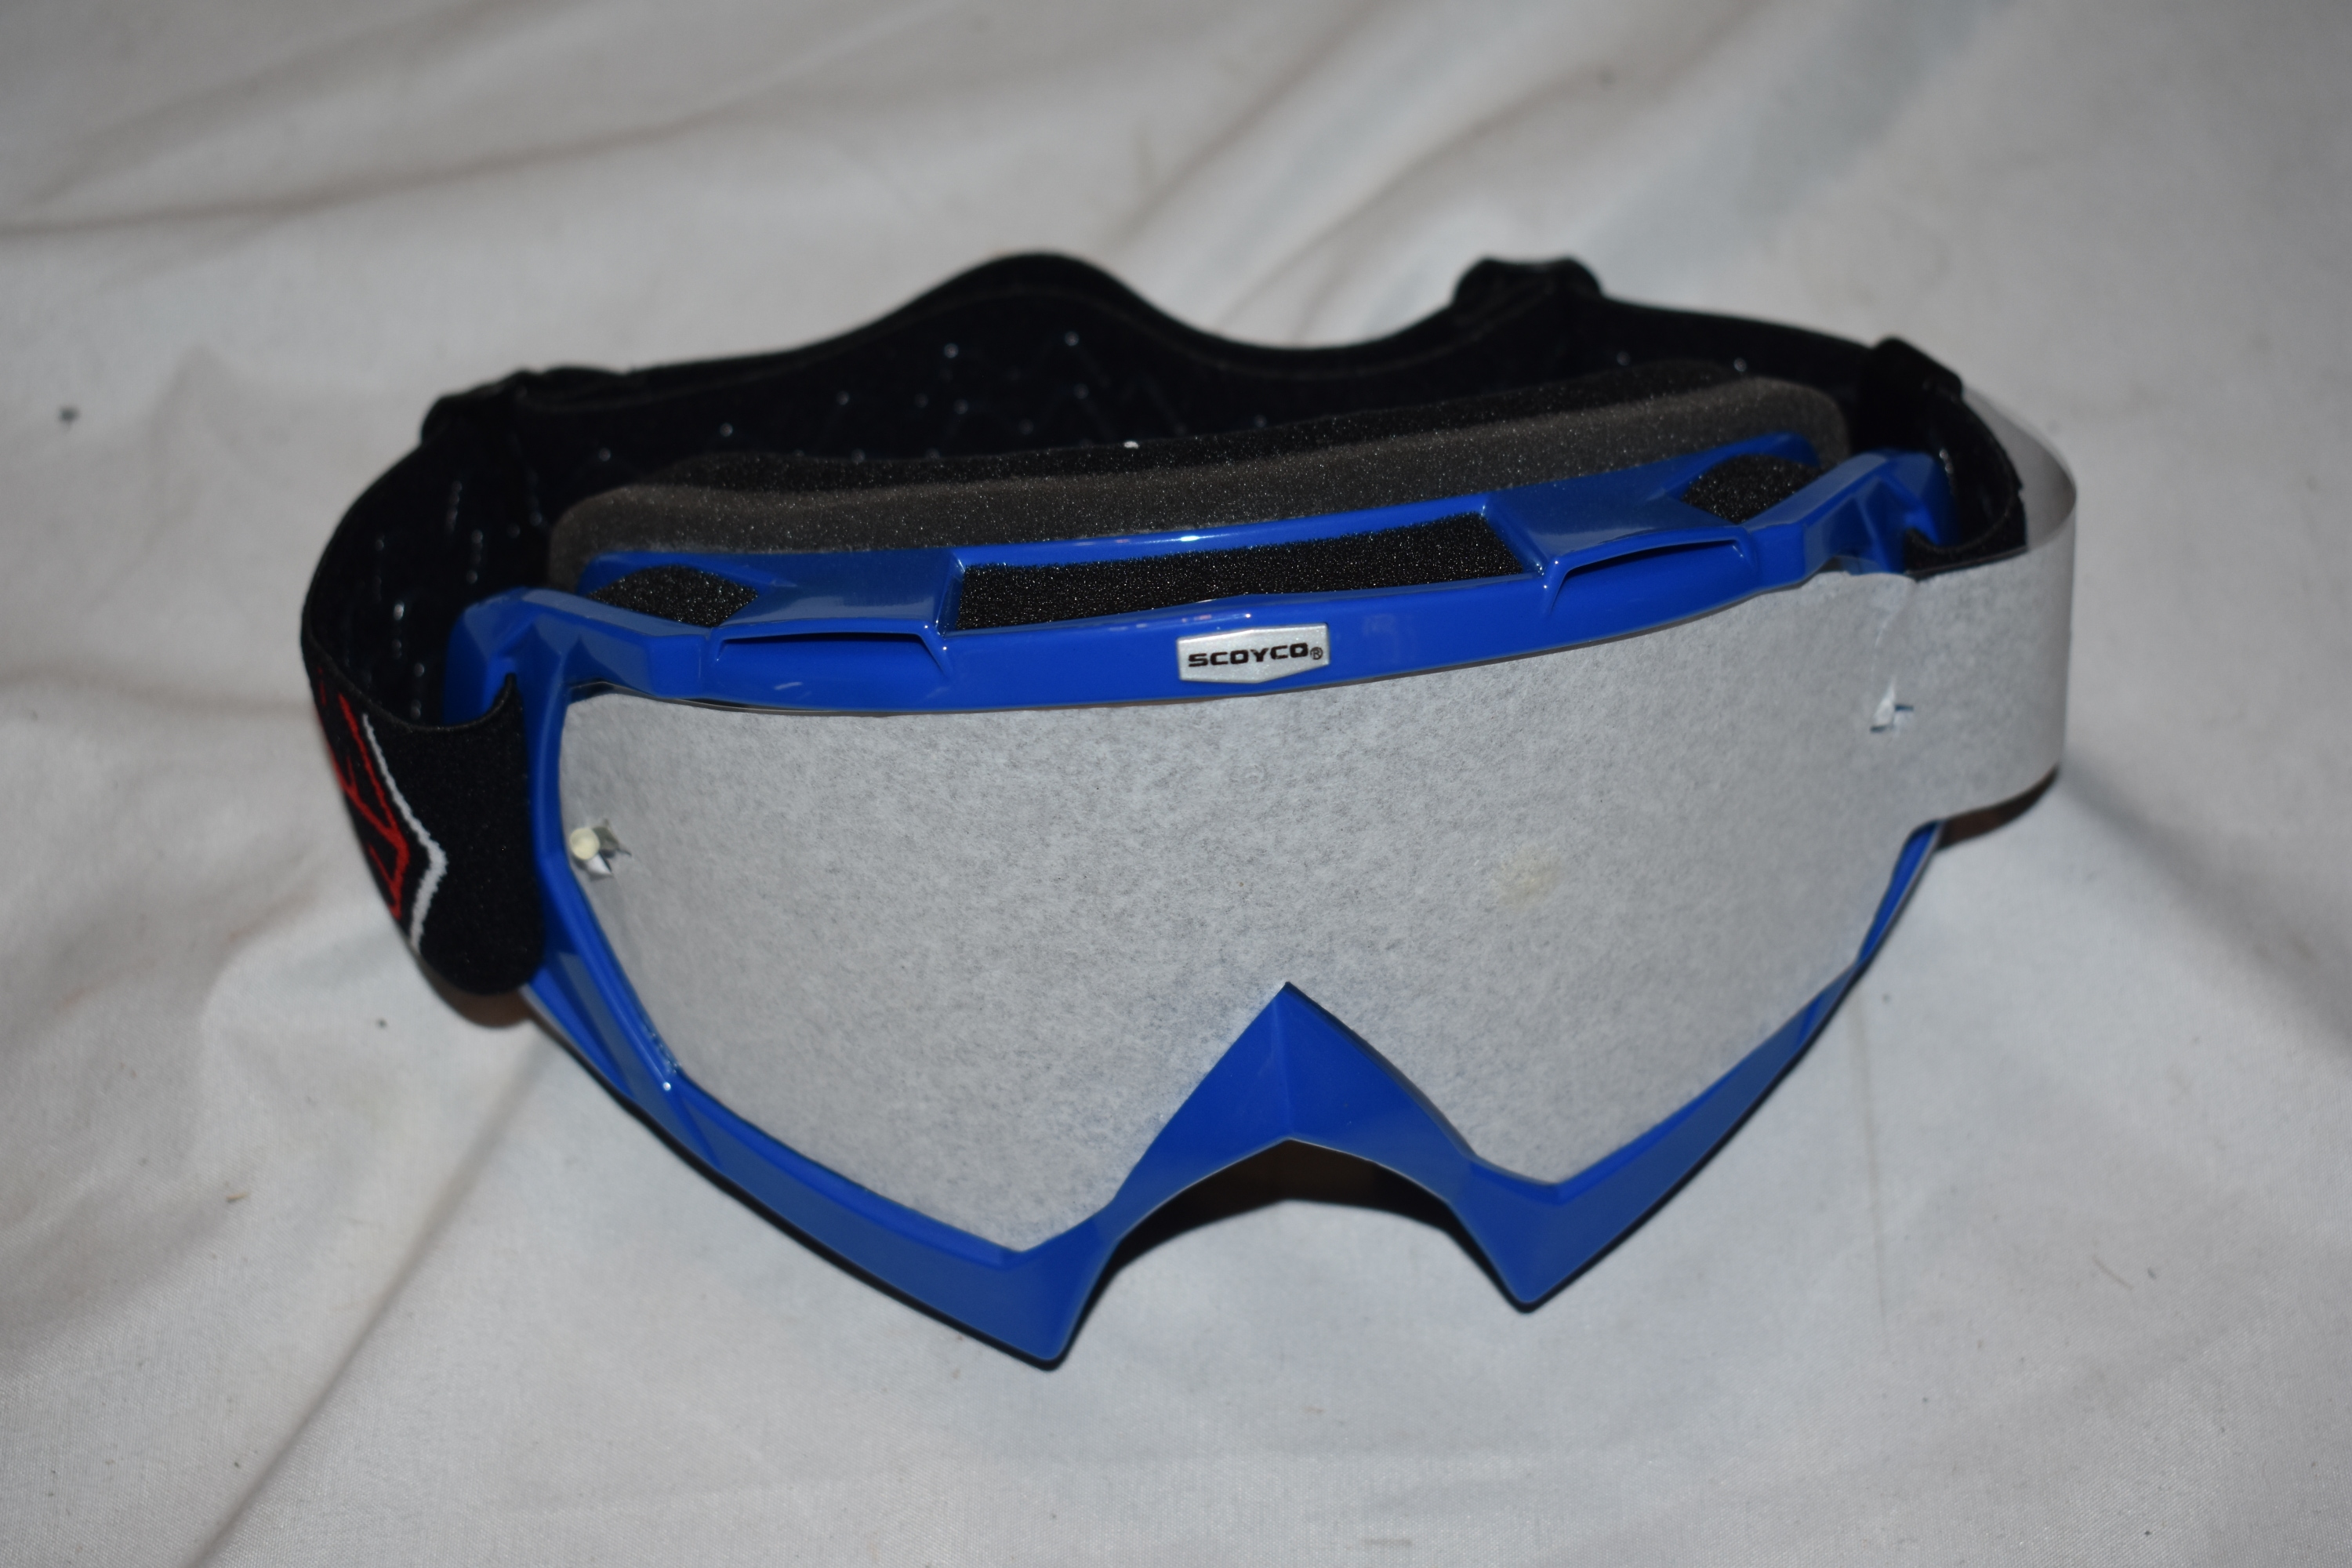 NEW - Scoyco MX Competition Motocross Goggles, Blue